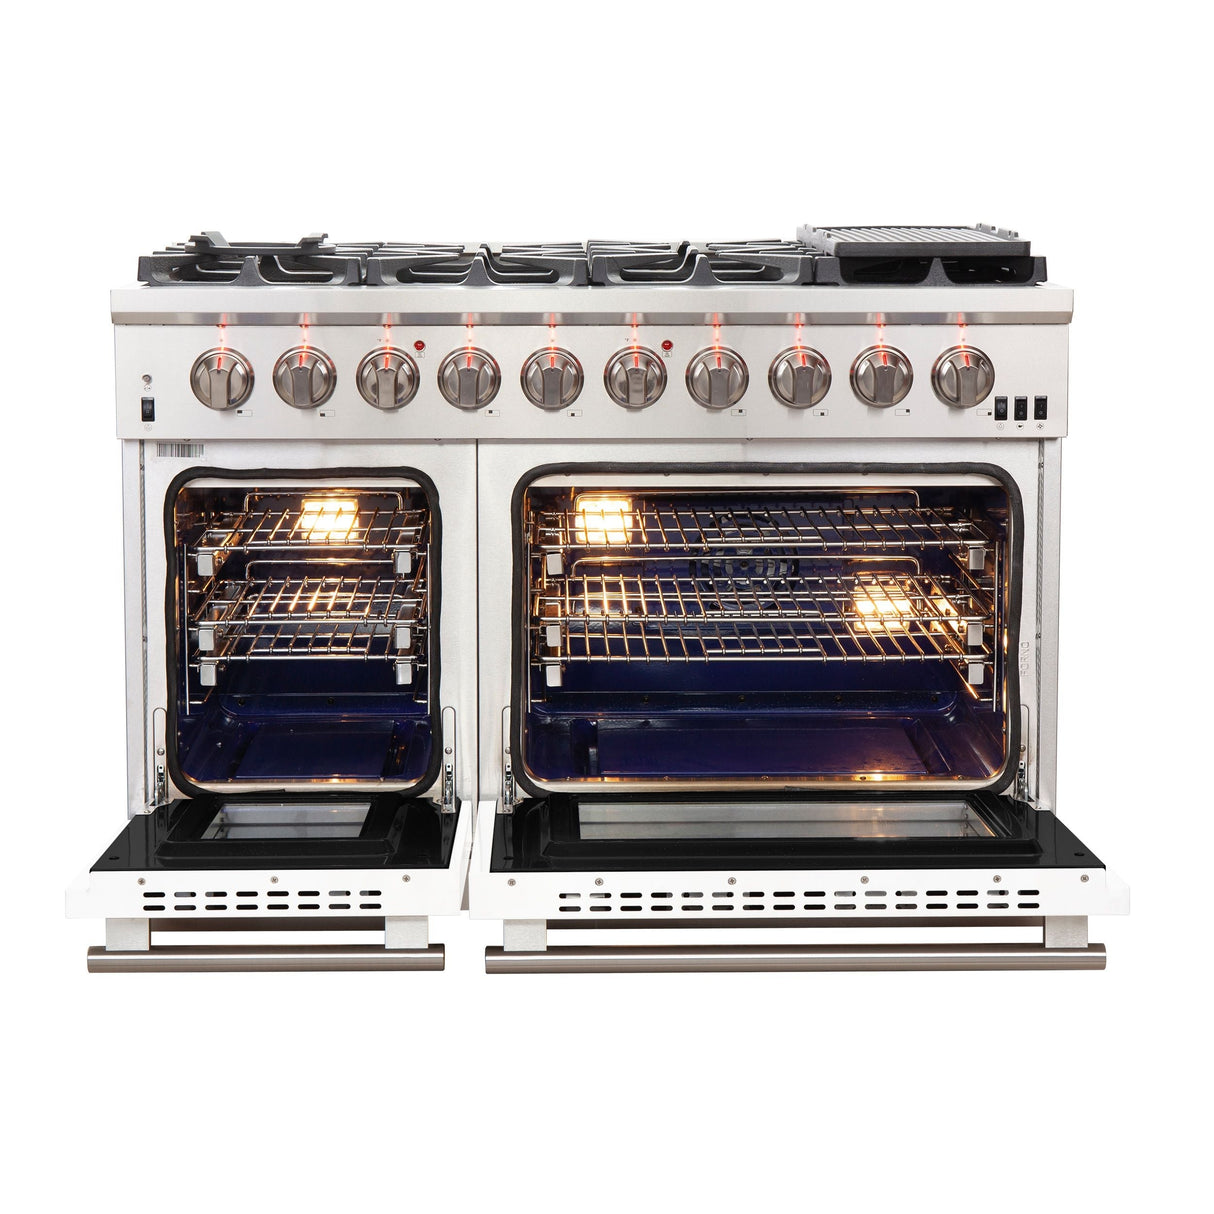 Forno 48-Inch Capriasca Gas Range with 8 Gas Burners and Convection Oven in Stainless Steel with White Door (FFSGS6260-48WHT)